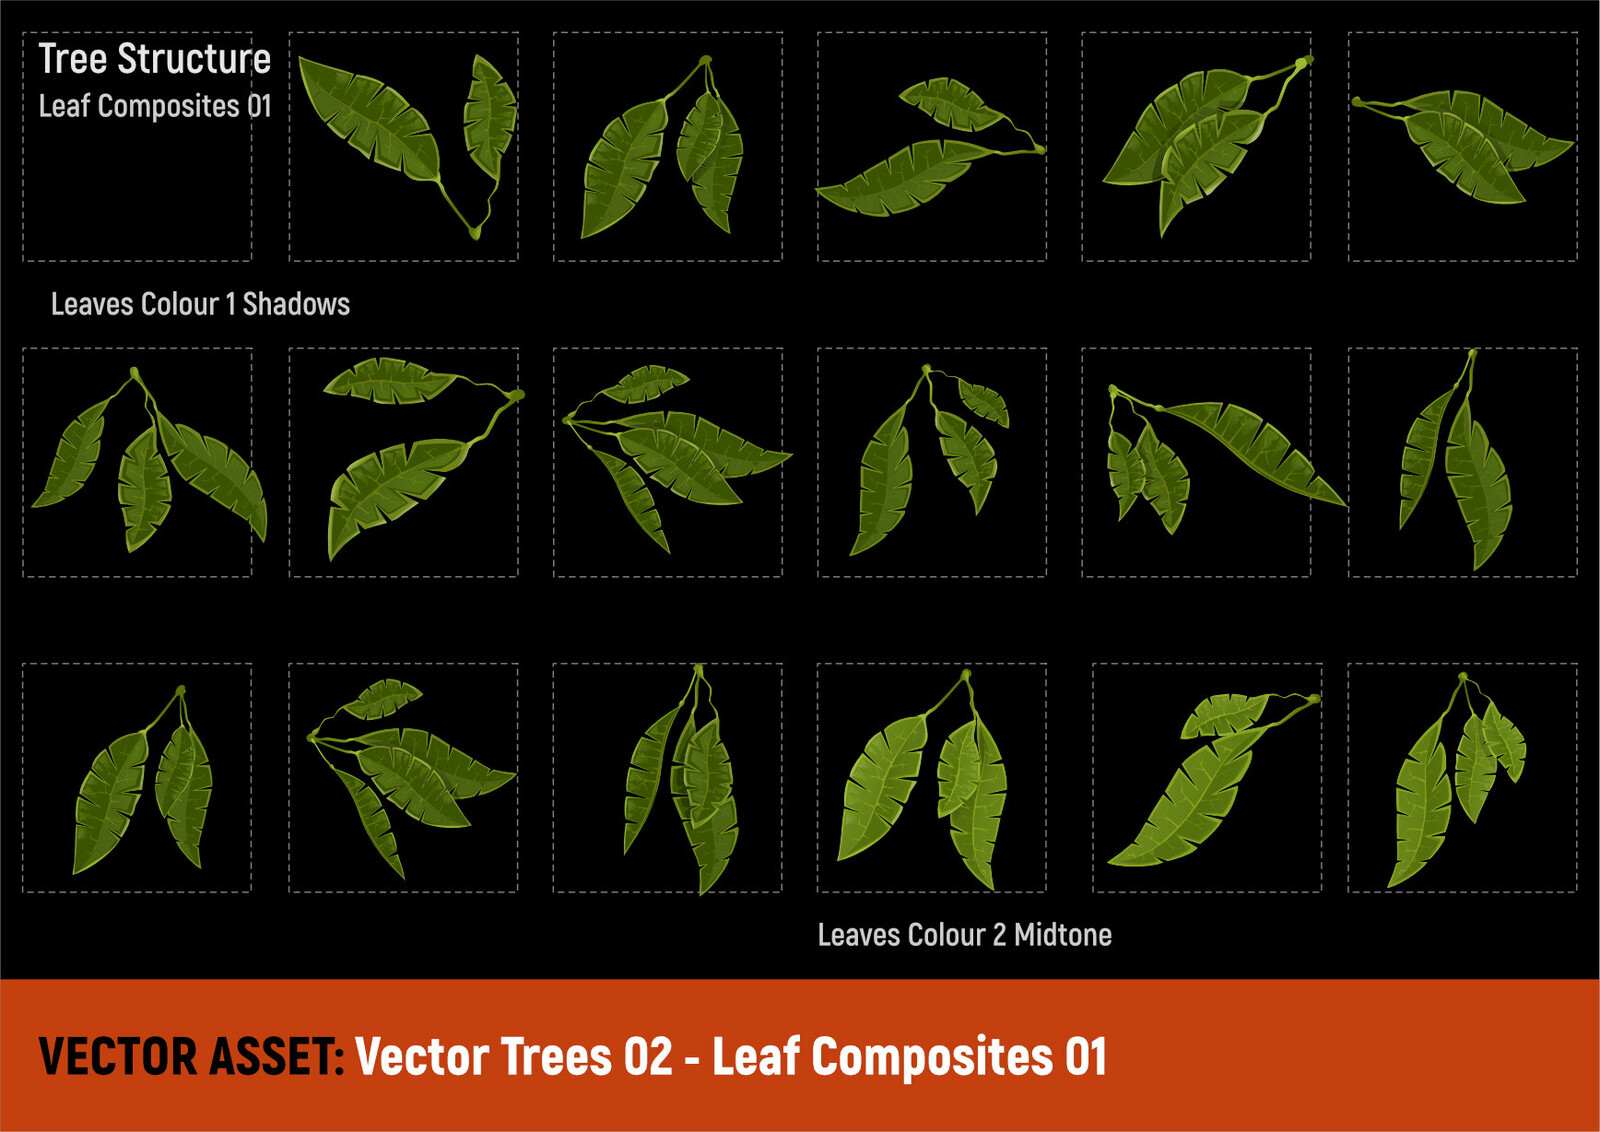 Leaf Compositions